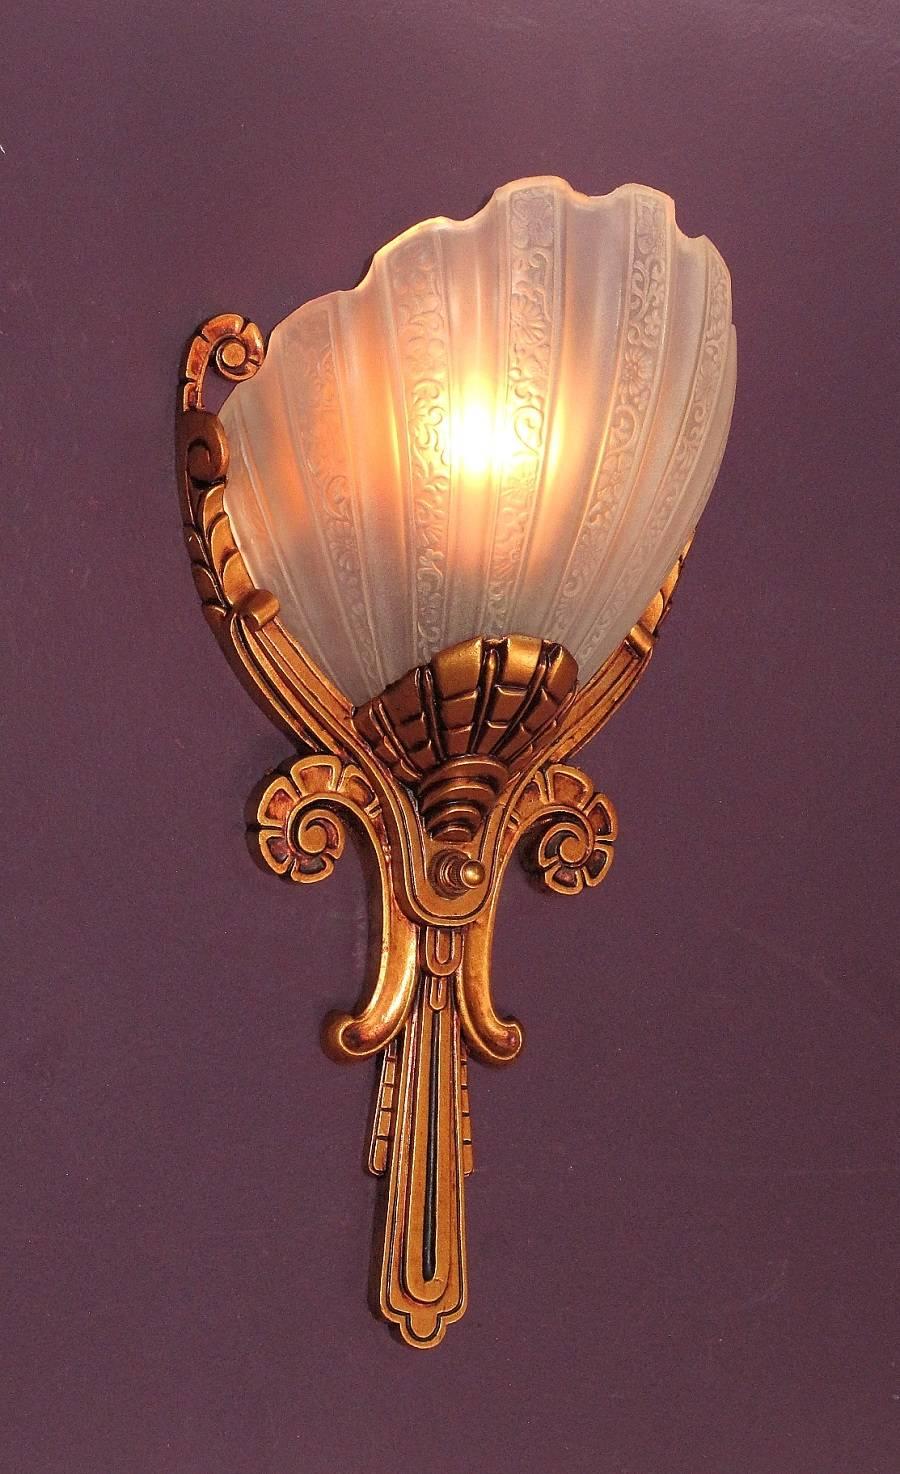 Polychromed Regal 1930s Deco Sconces 2 pair available priced per pair